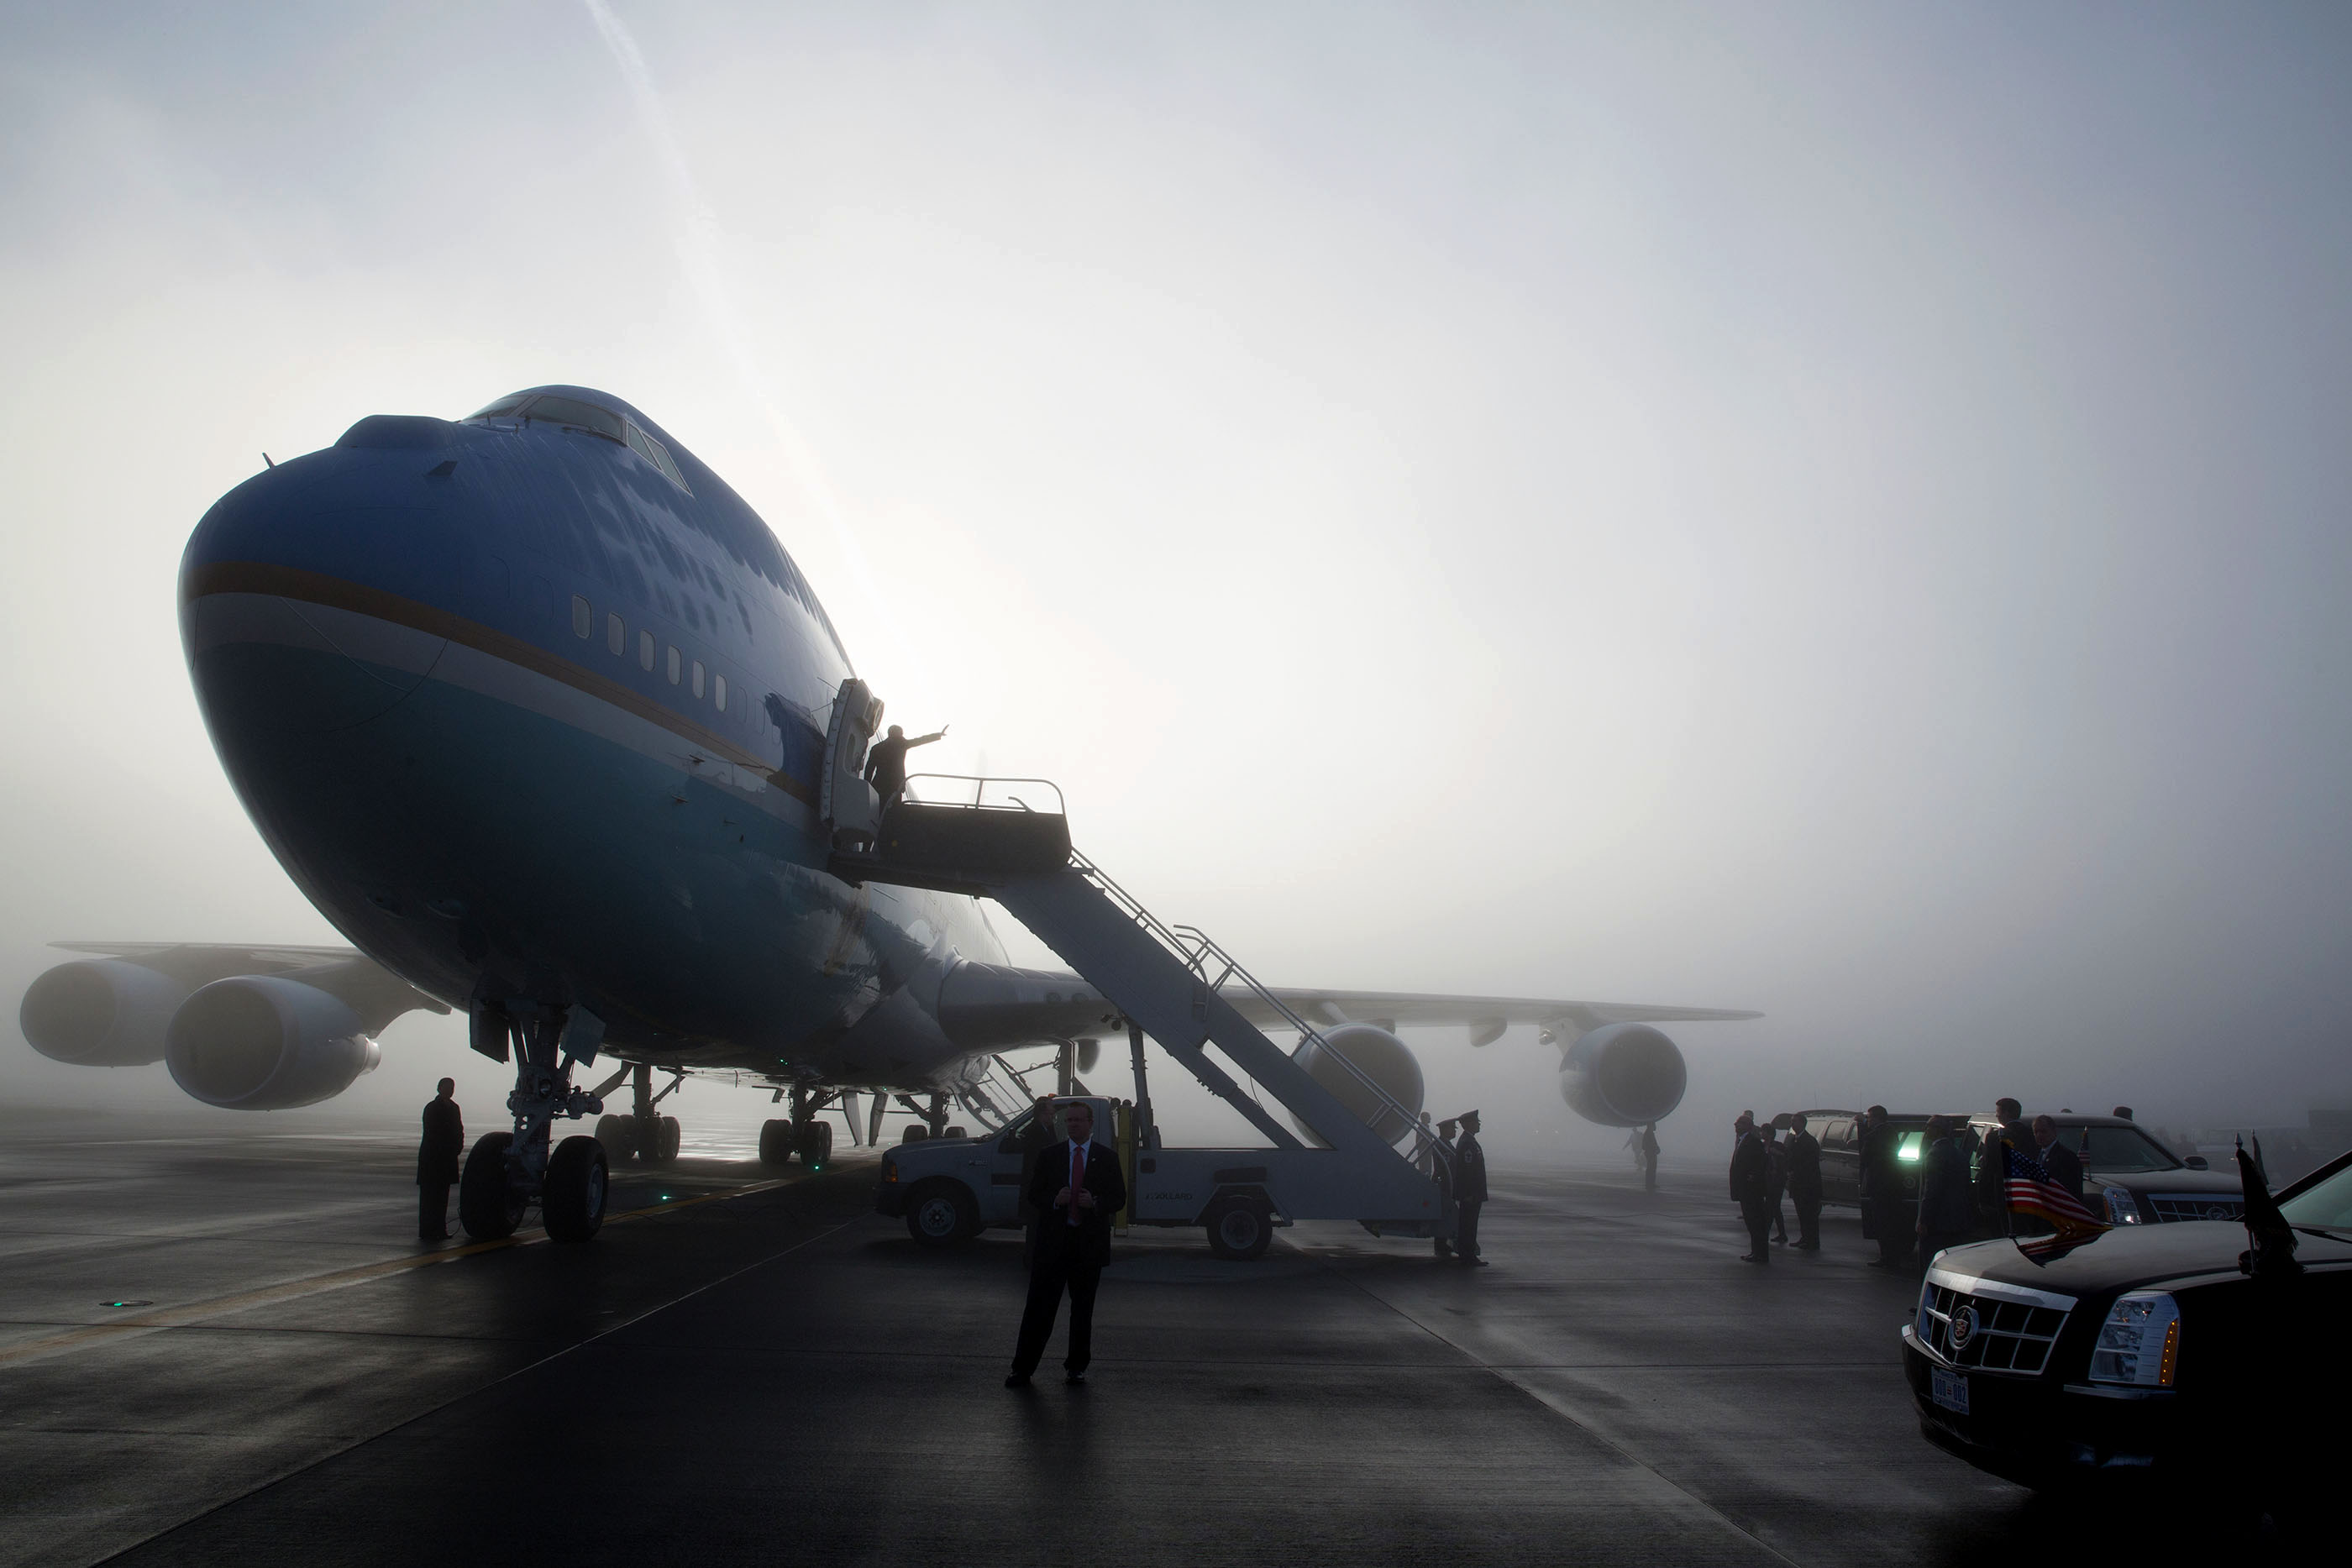 Washington, Nov. 25, 2013. Departing Seattle on a foggy morning. (Official White House Photo by Pete Souza)